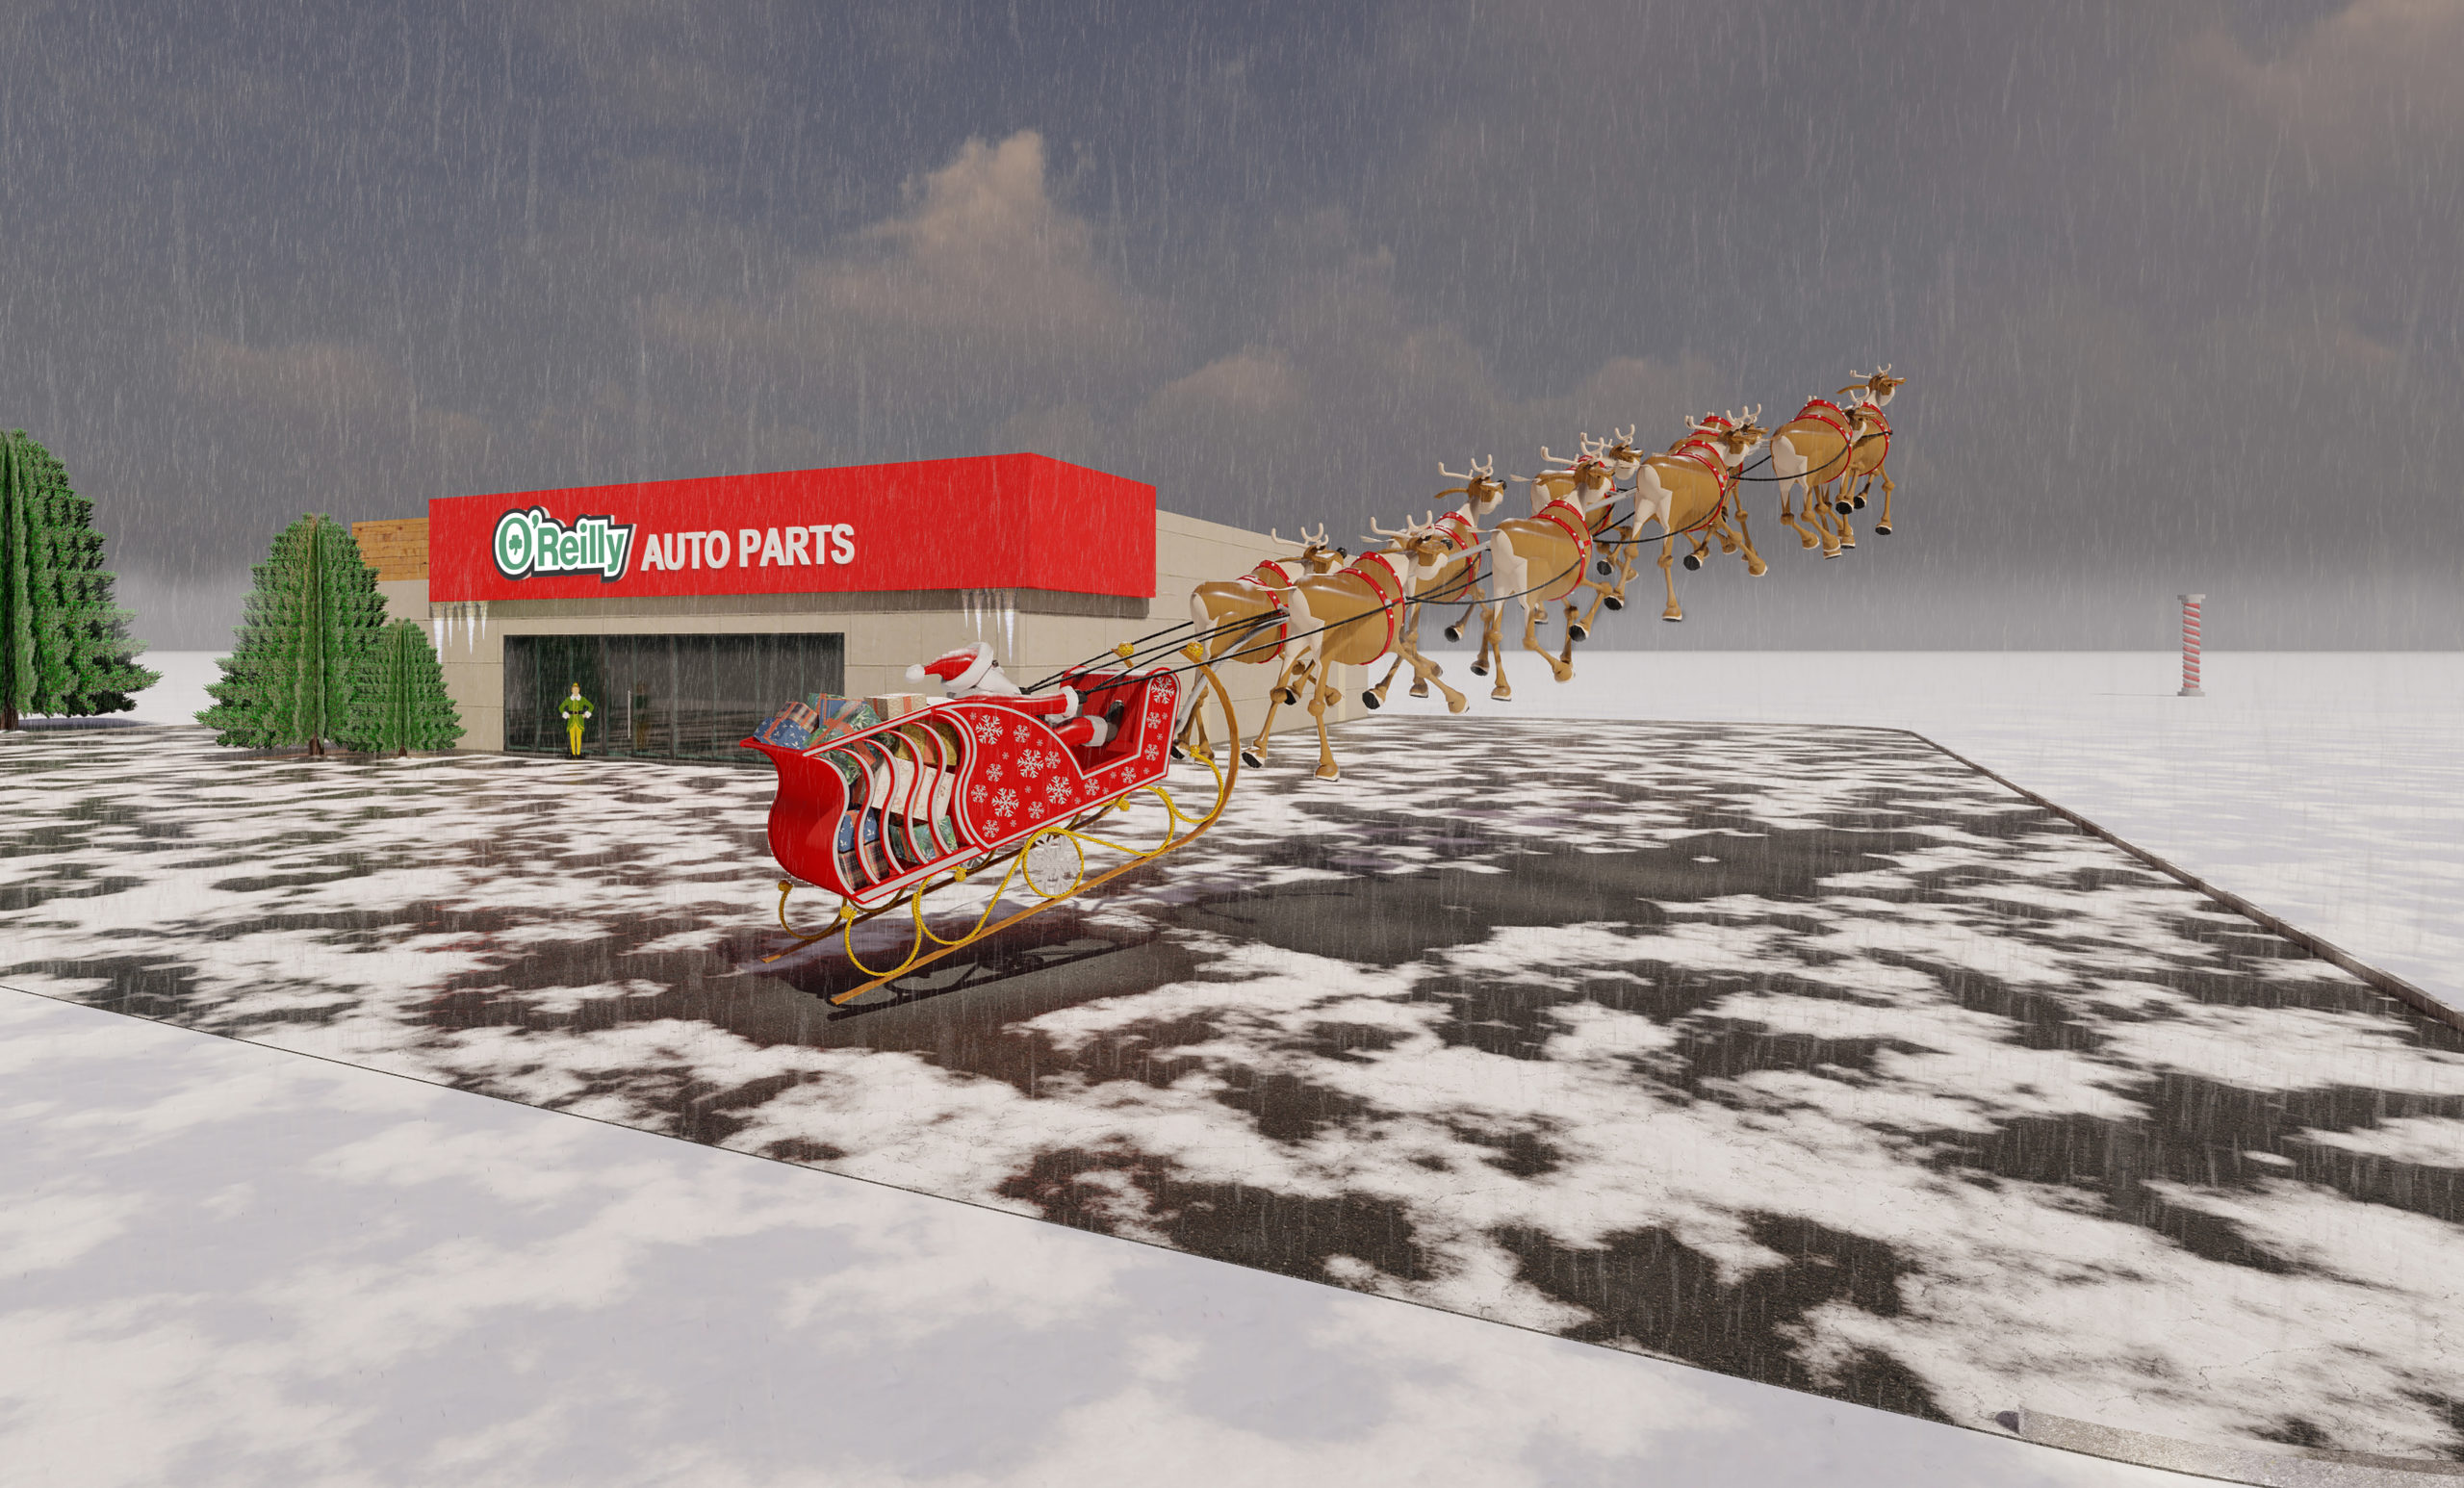 Winter Wonderland: Santa and his Reindeers in front of O'Reilly Auto Parts concept rendering